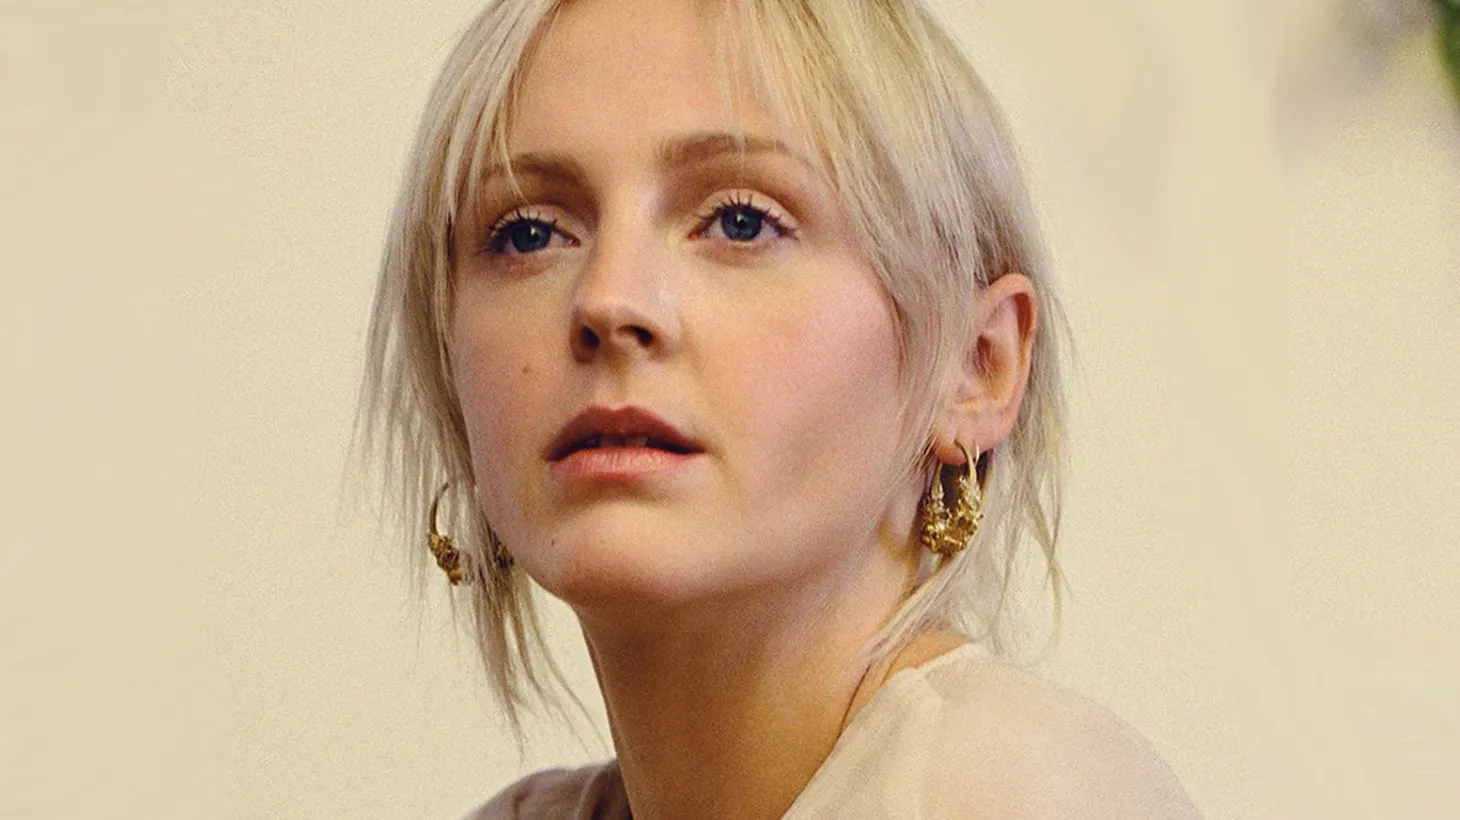 When we first heard Laura Marling's new album Semper Femina, we were floored by its beauty.